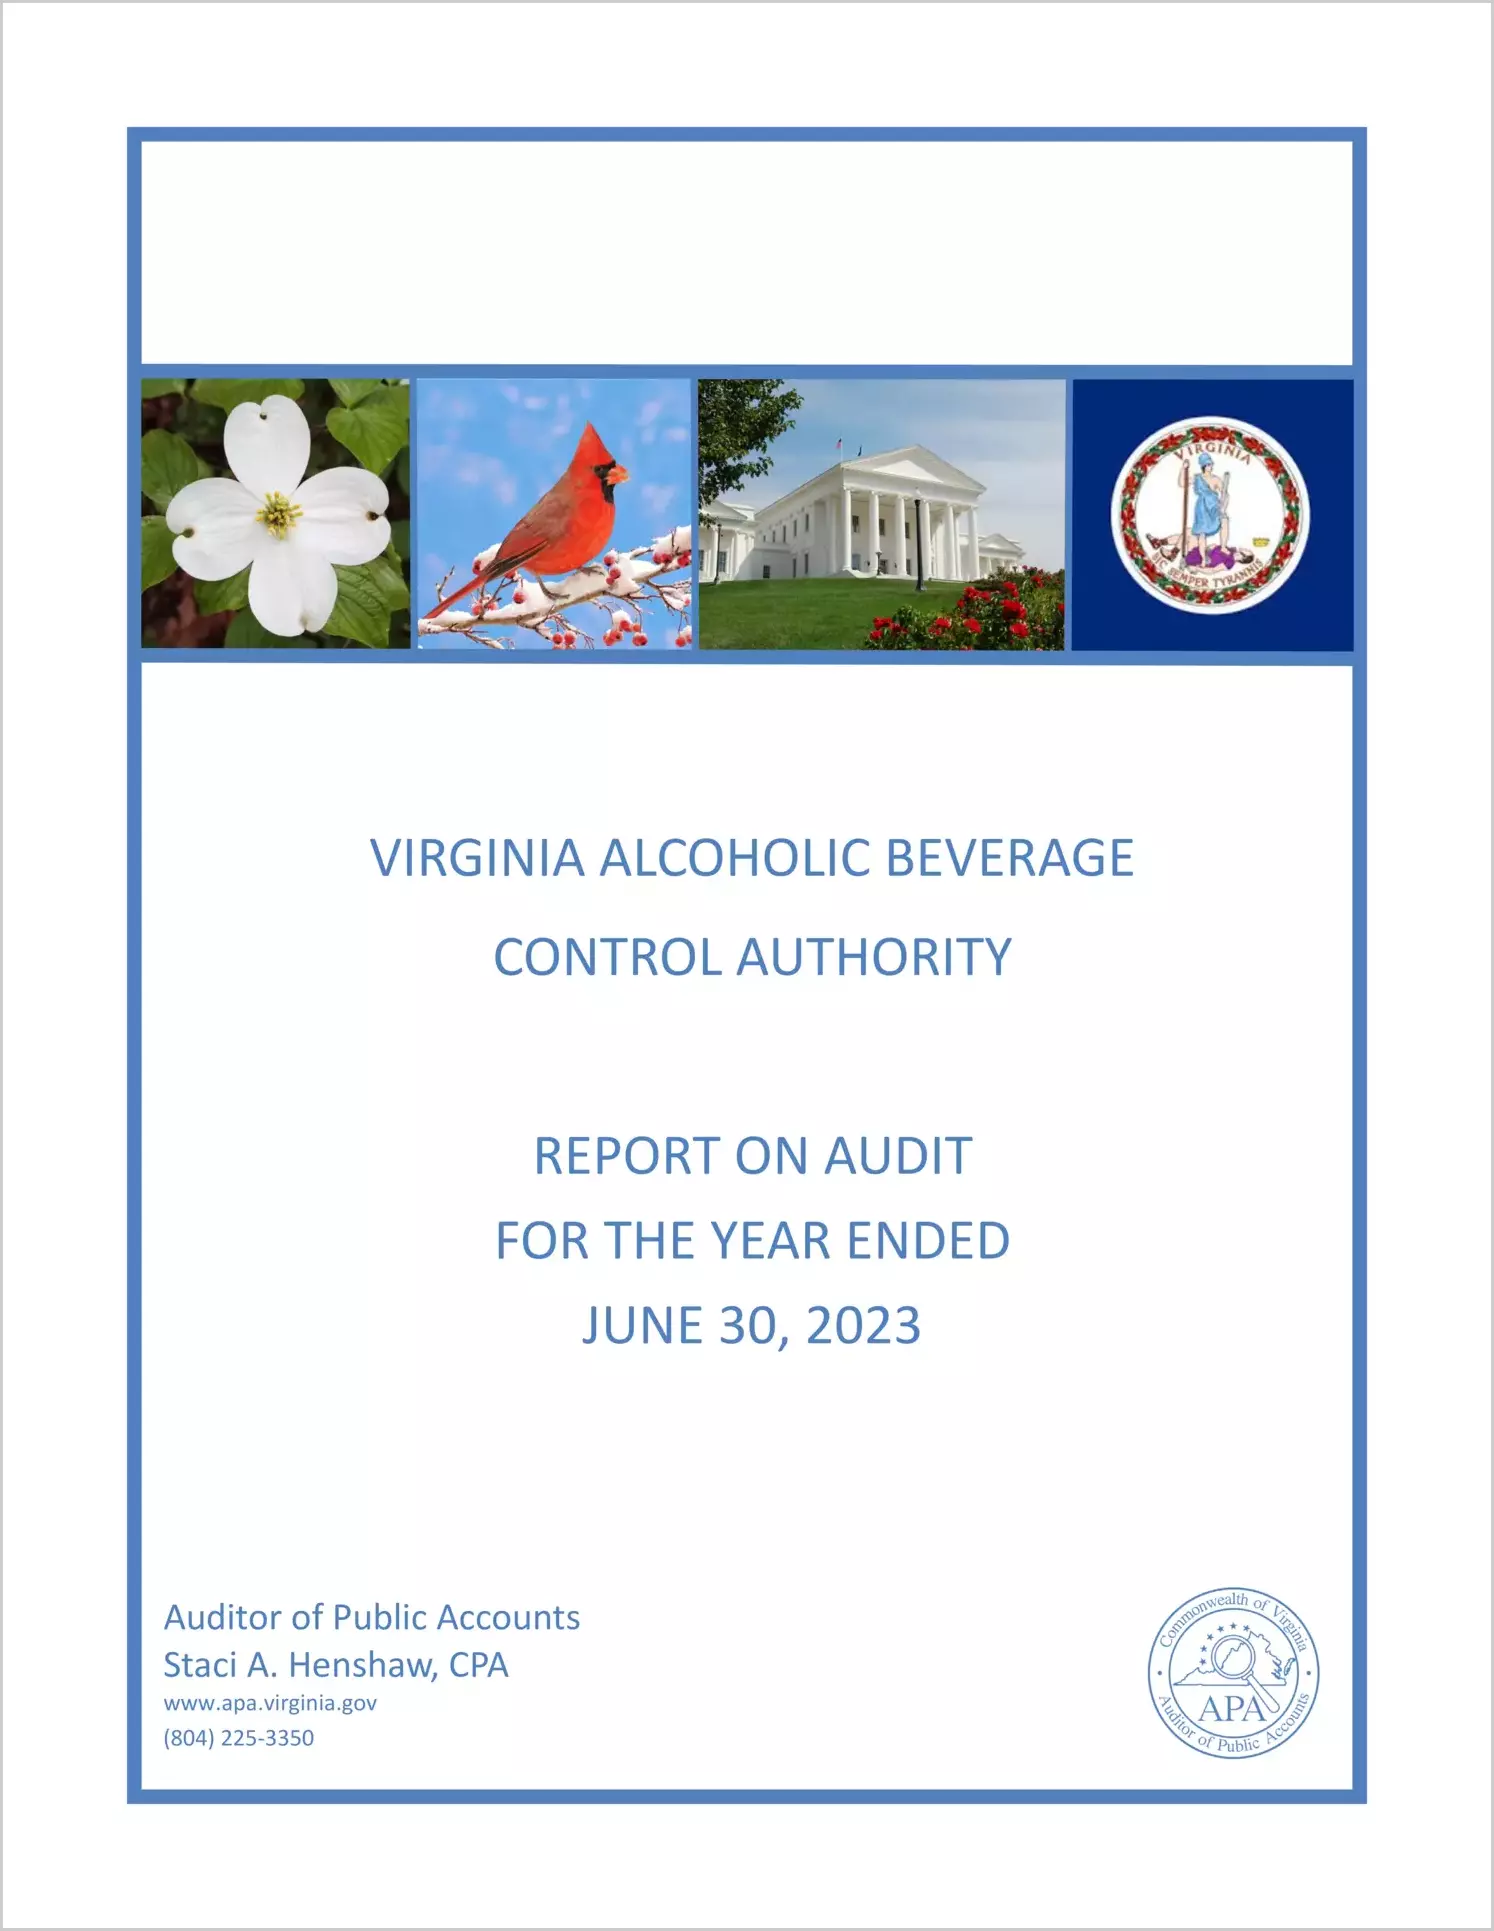 Virginia Alcoholic Beverage Control Authority for the year ended June 30, 2023